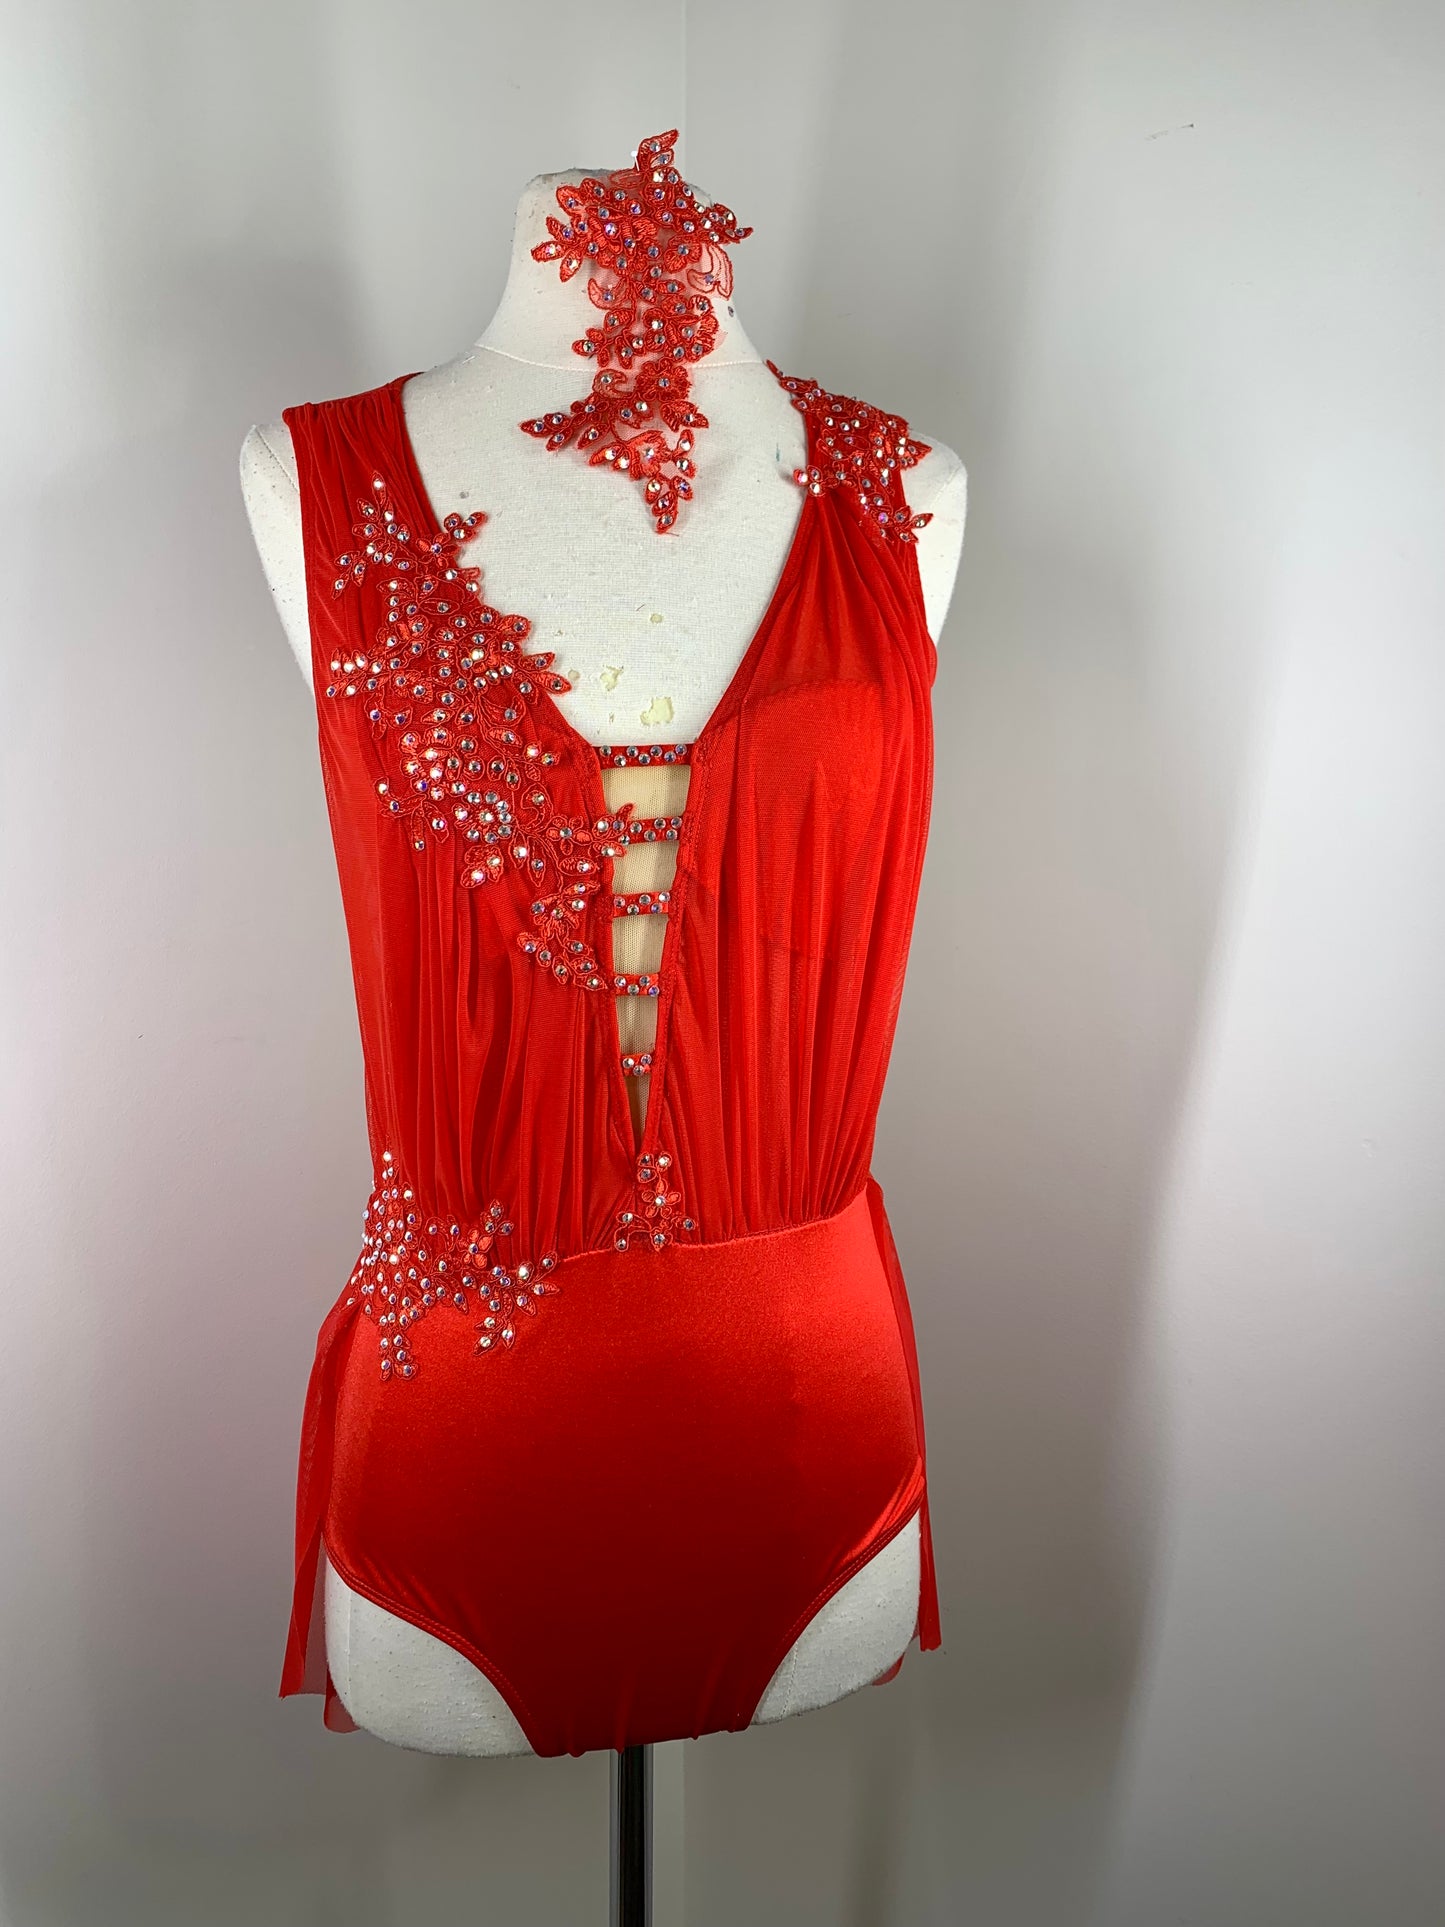 Crimson Red Sage costume with crystal ab stones and appliques